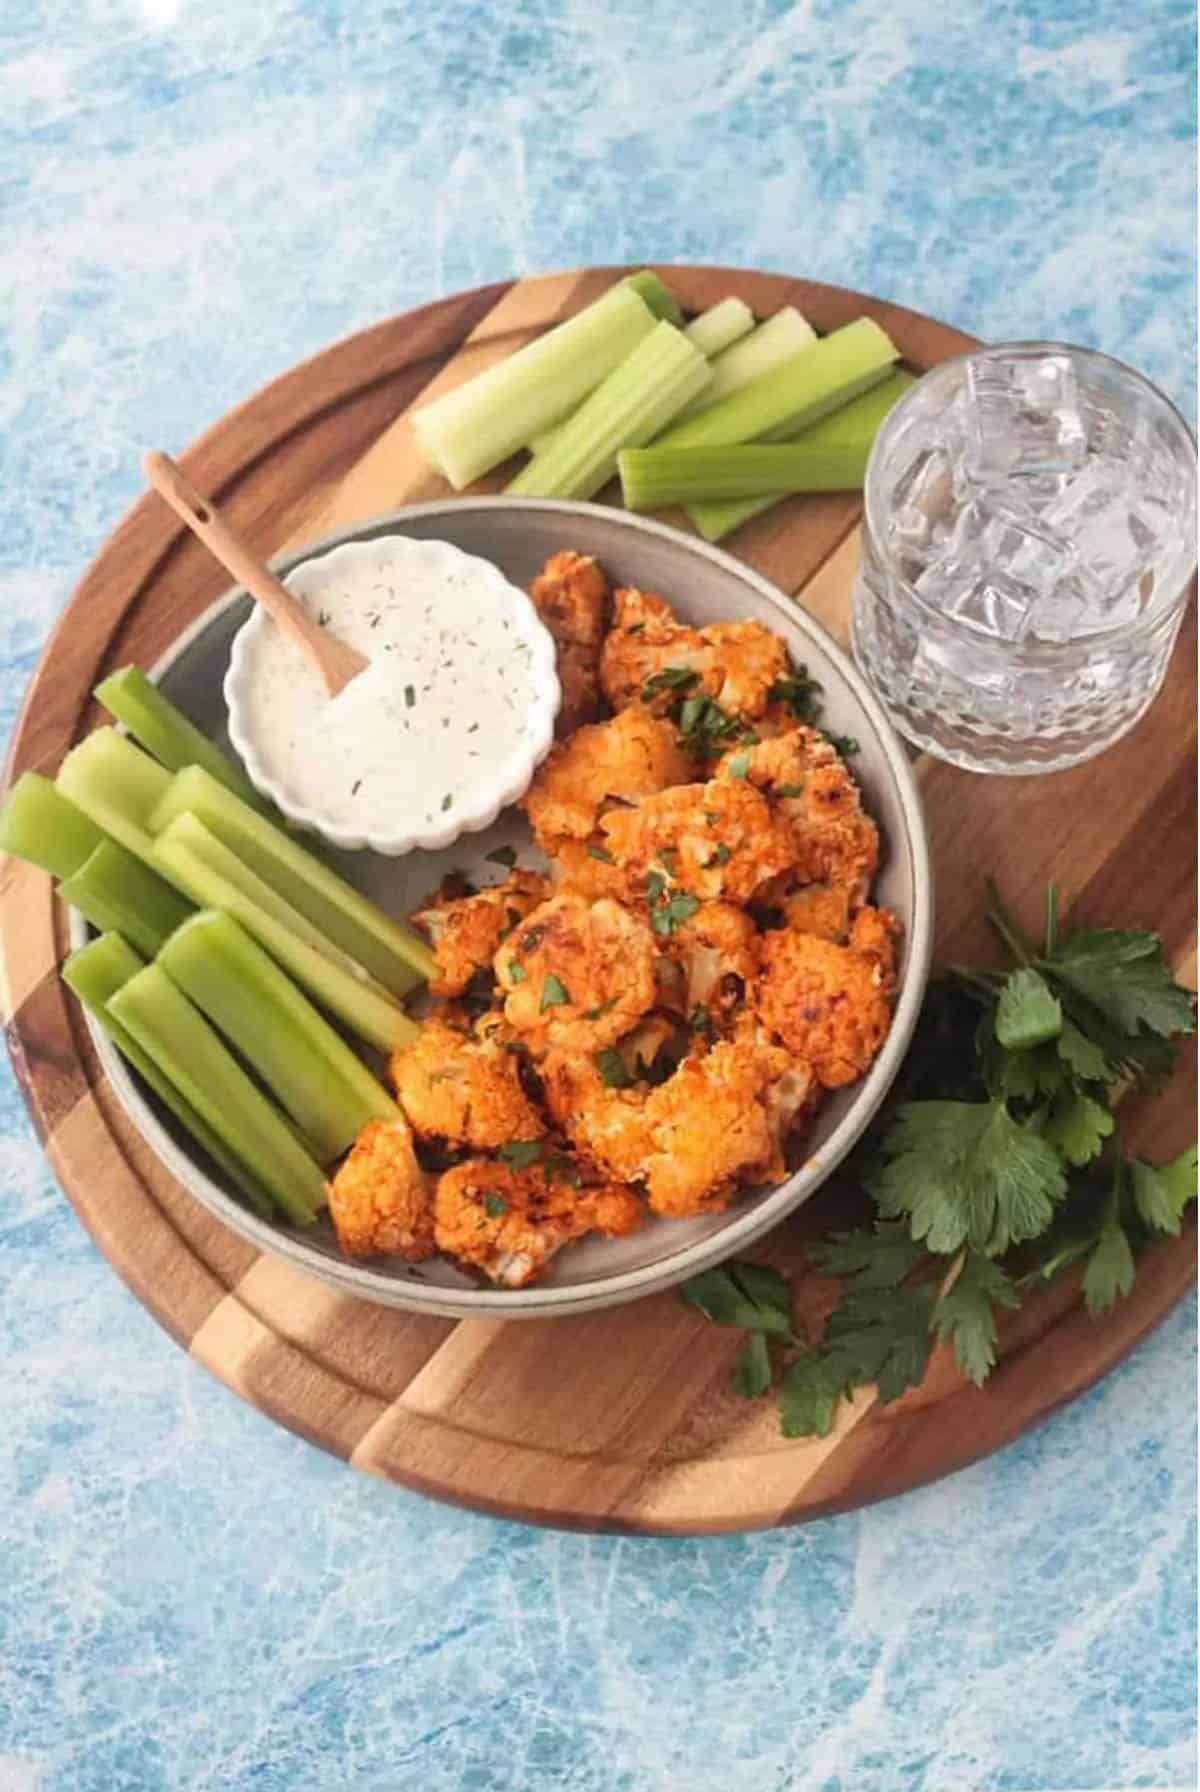 Cauliflower bites in a bowl with some celery sticks and ranch dressing